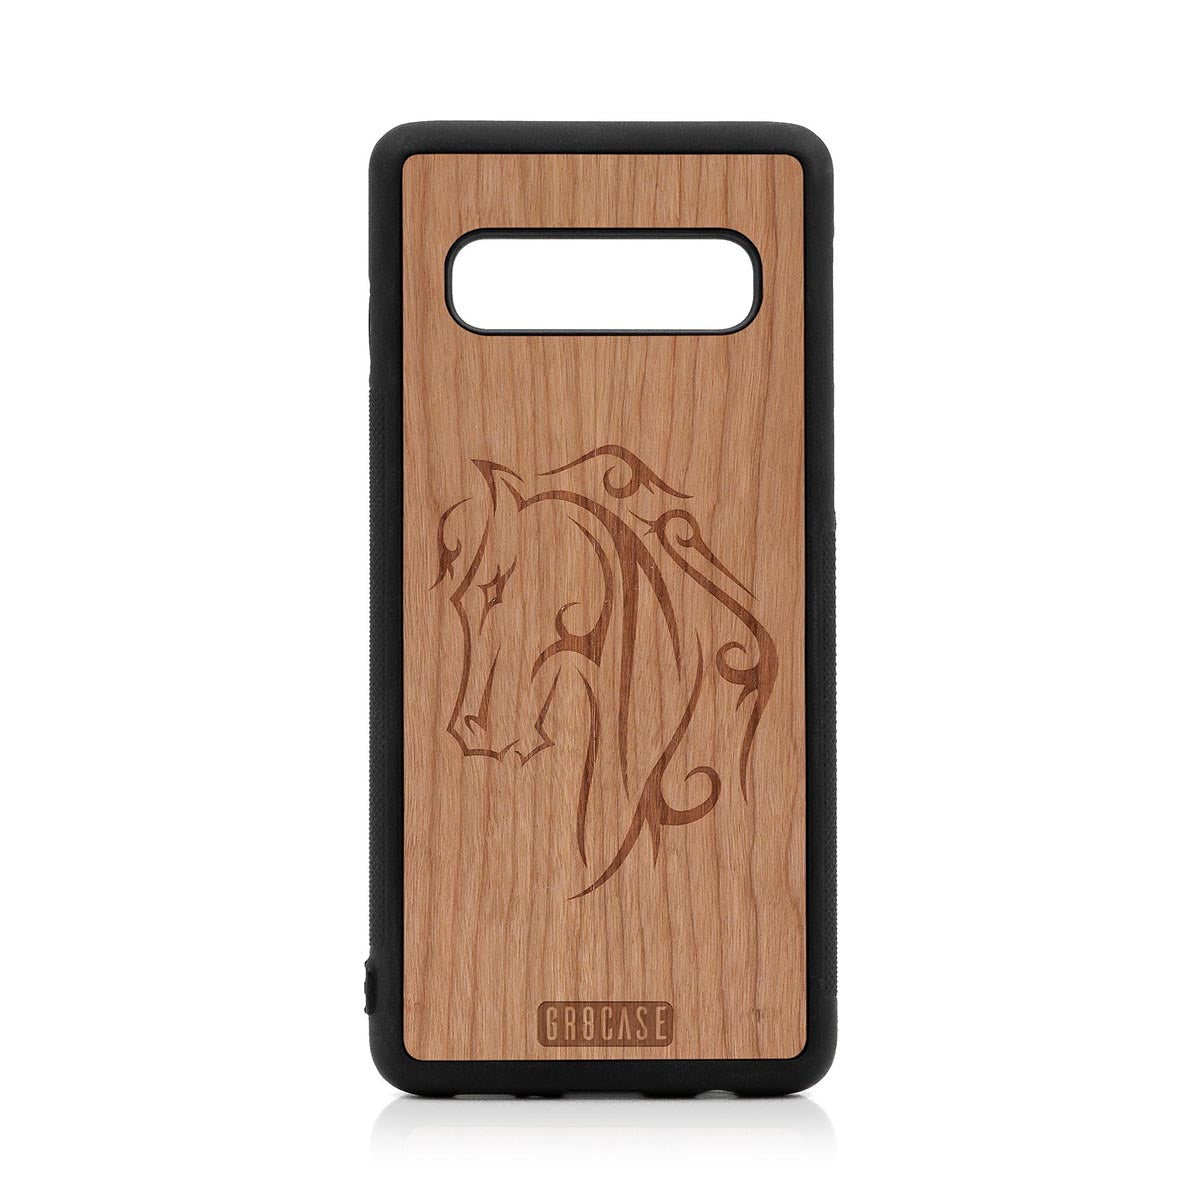 Horse Tattoo Design Wood Case For Samsung Galaxy S10 by GR8CASE